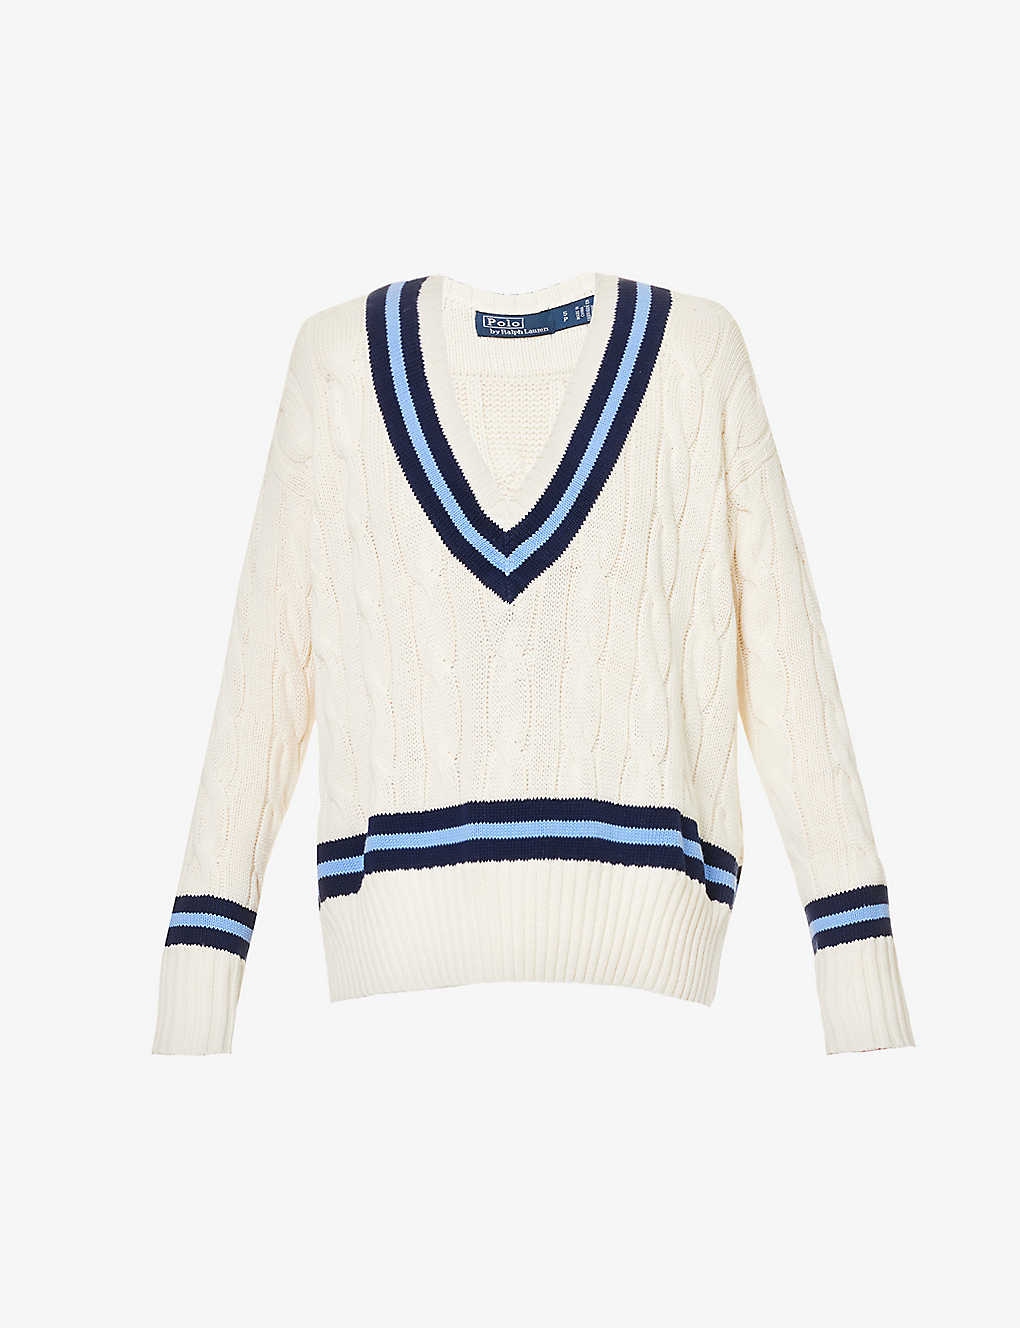 Shop Polo Ralph Lauren Women's Cream W/ Navy Stripe Cricket Relaxed-fit V-neck Cable-knit Jumper